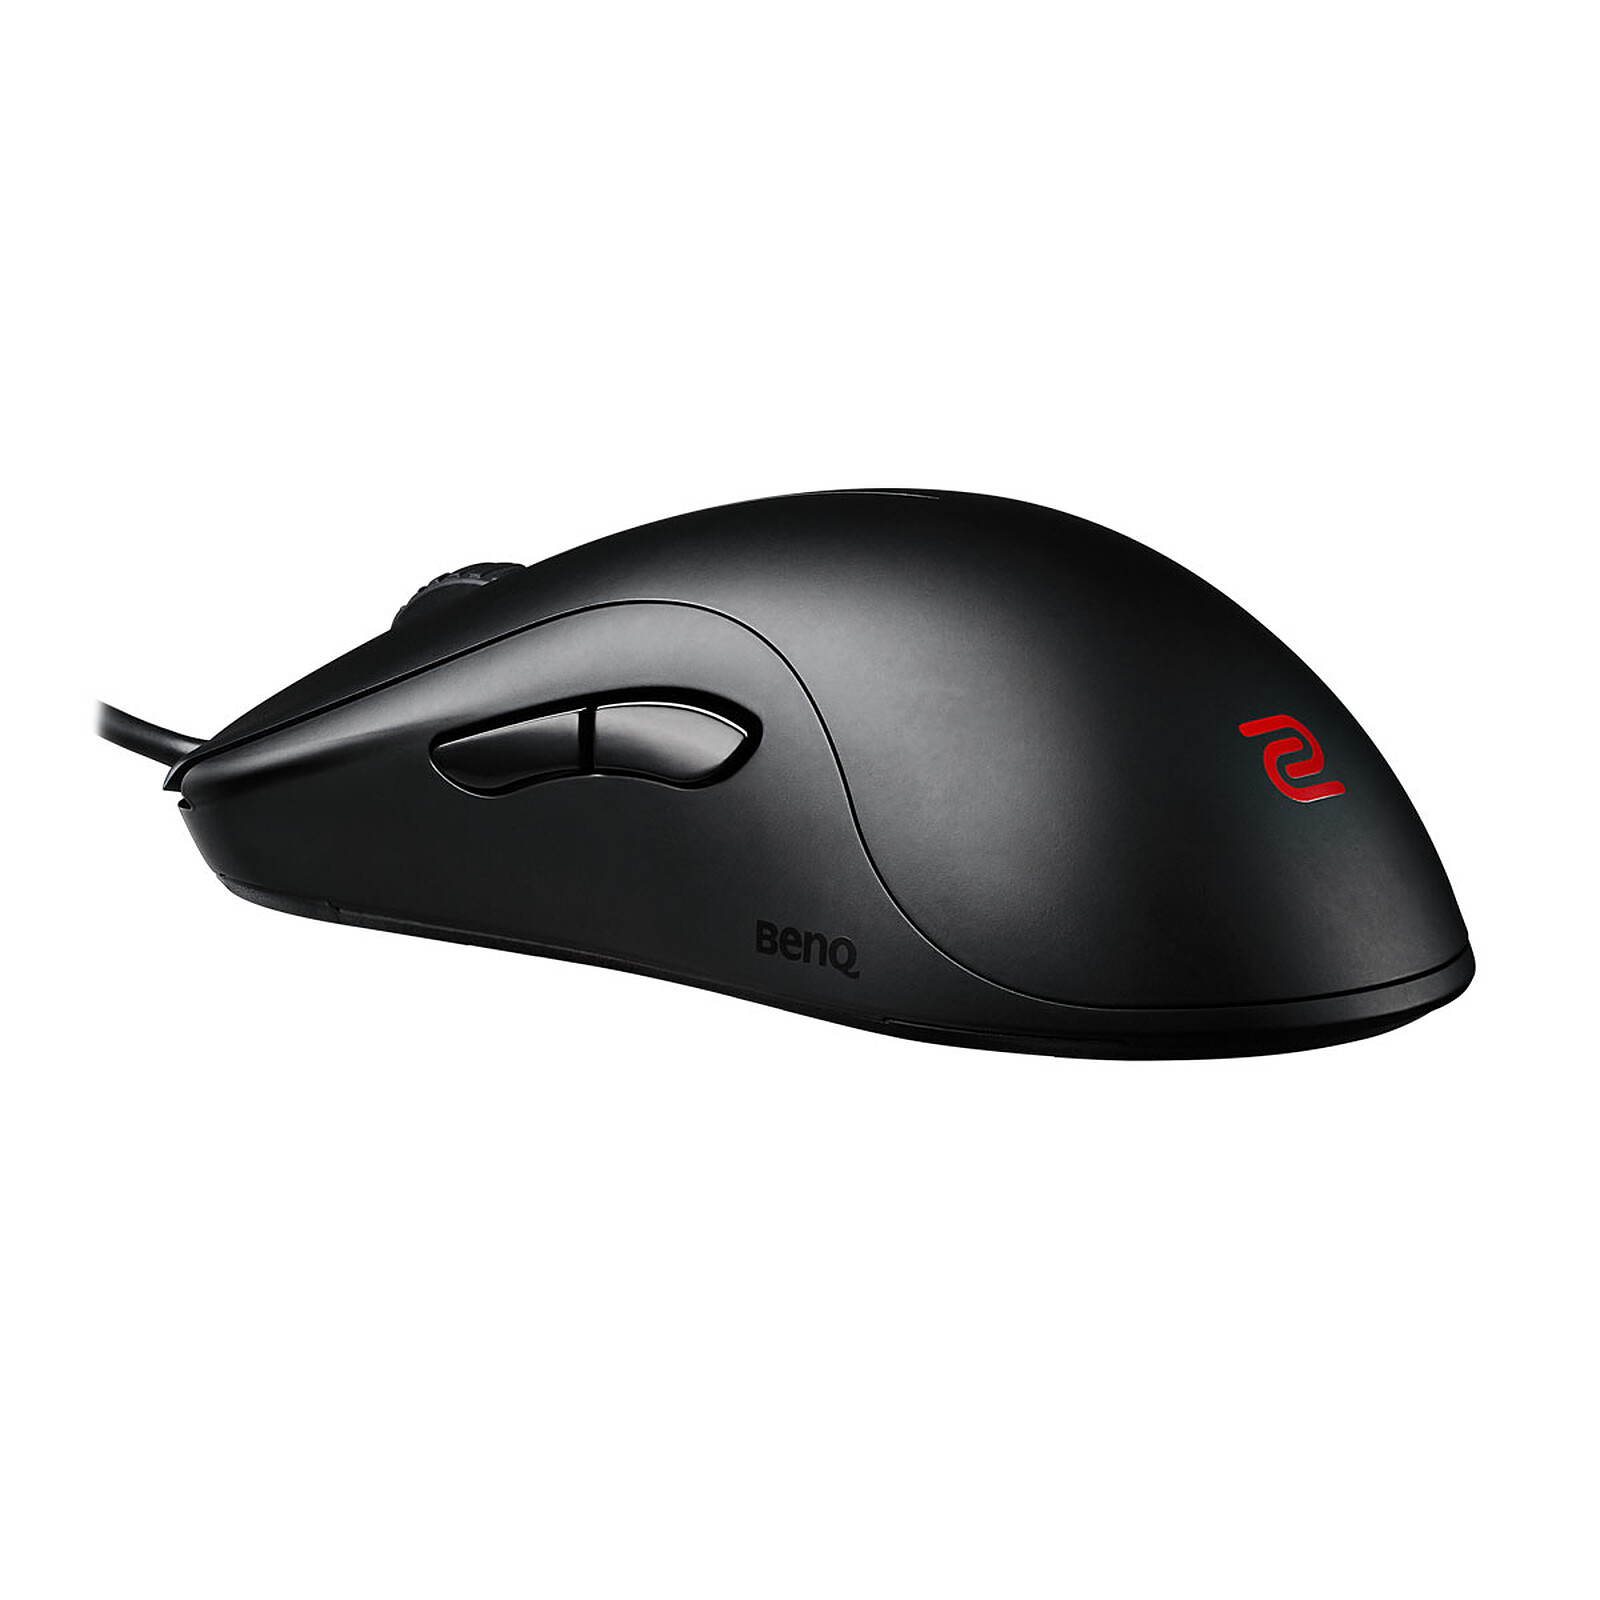 BenQ Zowie ZA13-B Black - Mouse BenQ Zowie on LDLC | Holy Moley